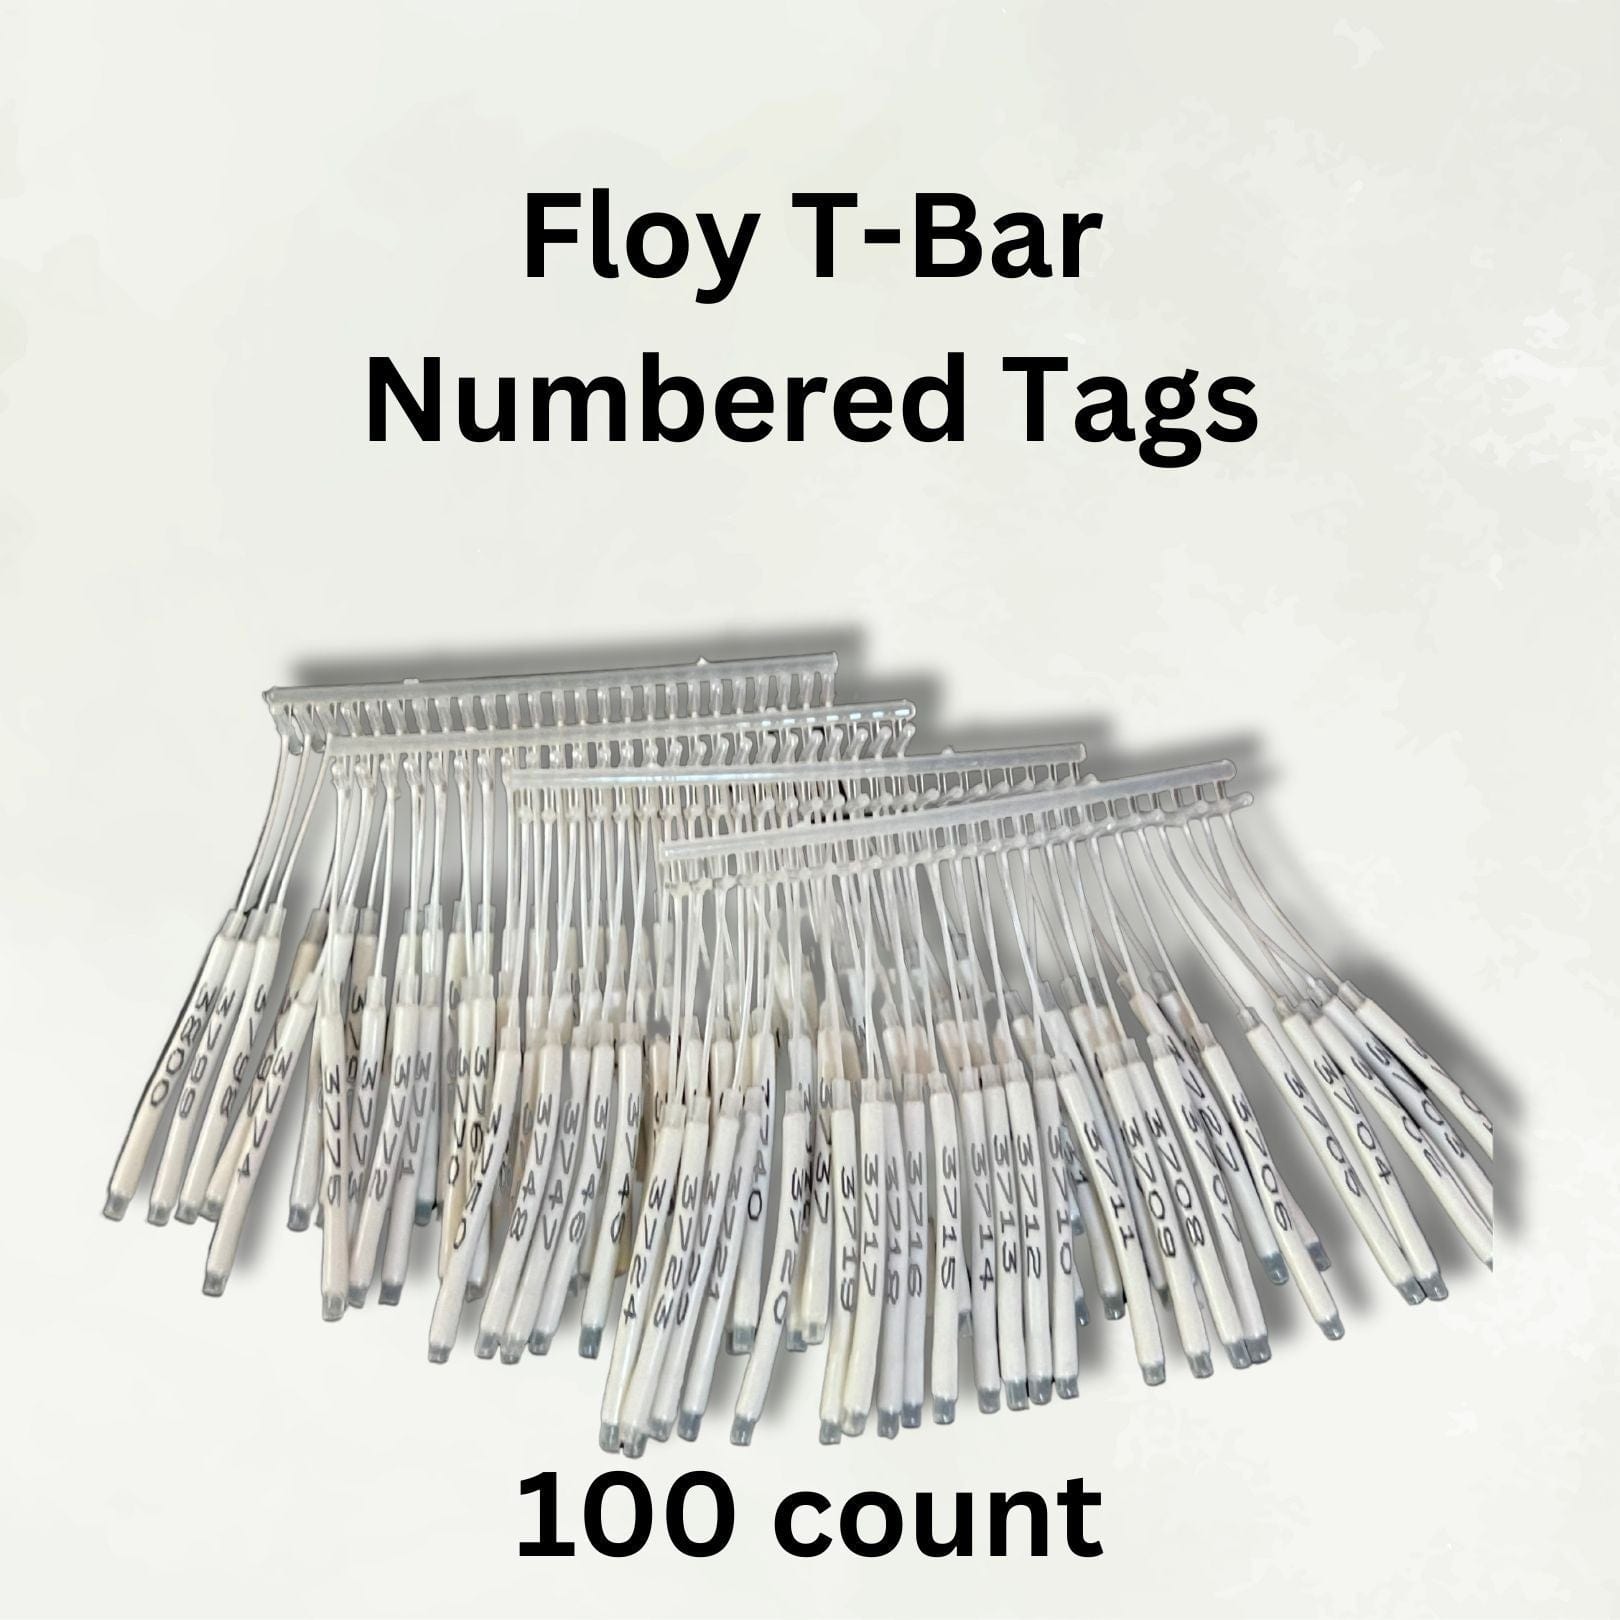 Smith Creek Lake & Pond Professional 100 Extra Numbered Tags Only Fish Tags Floy T-Bar Numbered Tags Numbered Fish Tags for Sale | Floy T-Bar Anchor Fish Tags